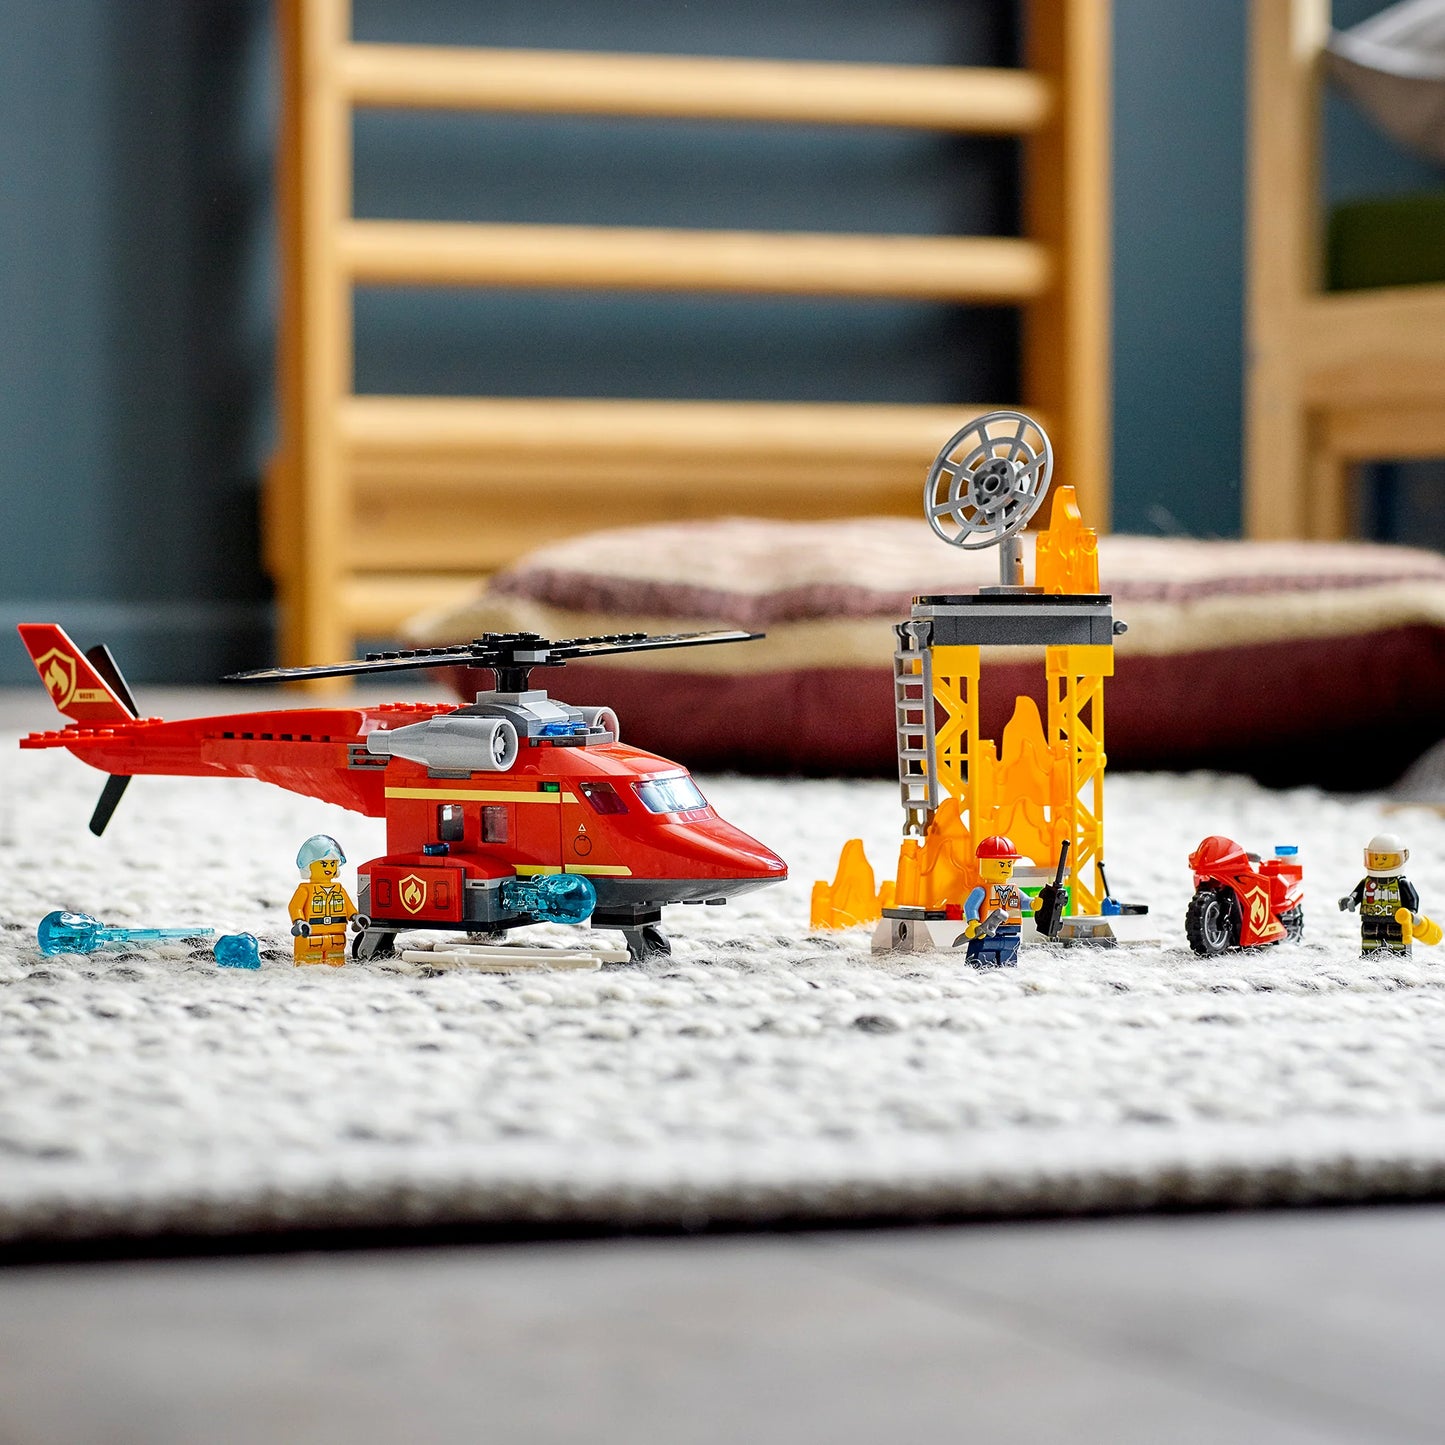 Rescue Helicopter-LEGO City